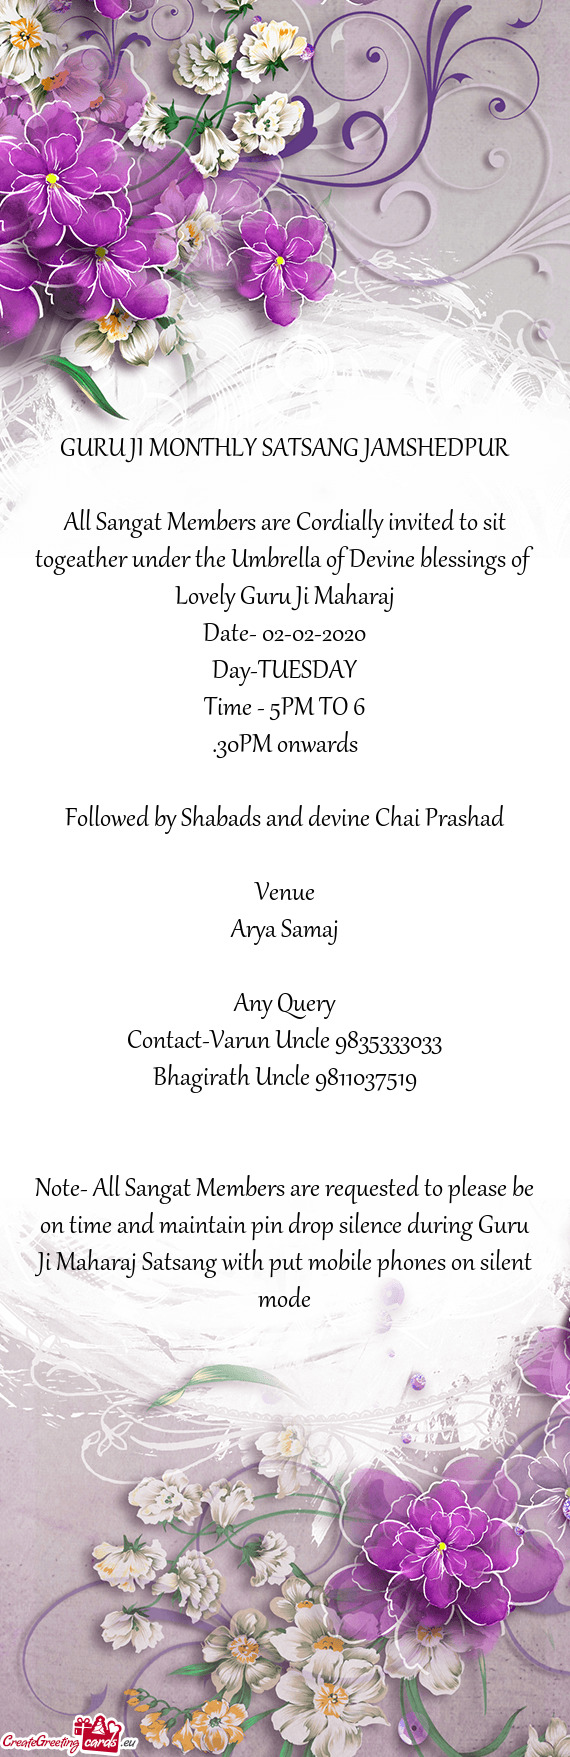 All Sangat Members are Cordially invited to sit togeather under the Umbrella of Devine blessings of